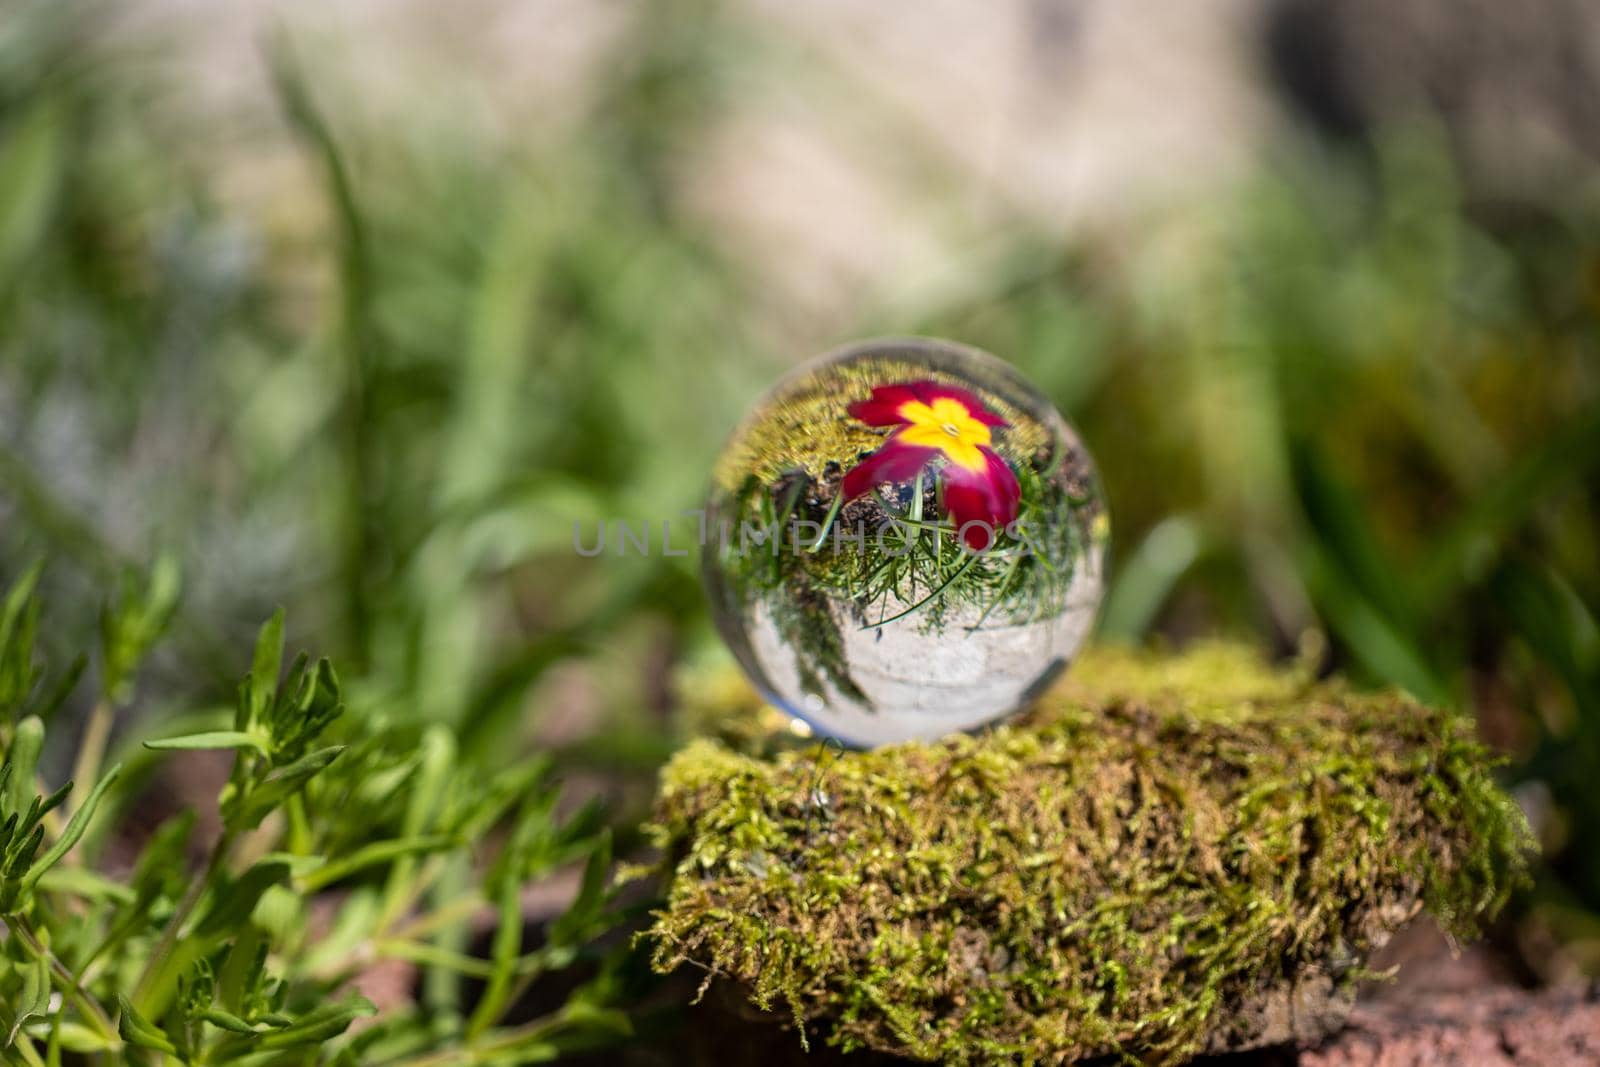 Crystal ball with red primrose blossom on moss covered stone  by reinerc